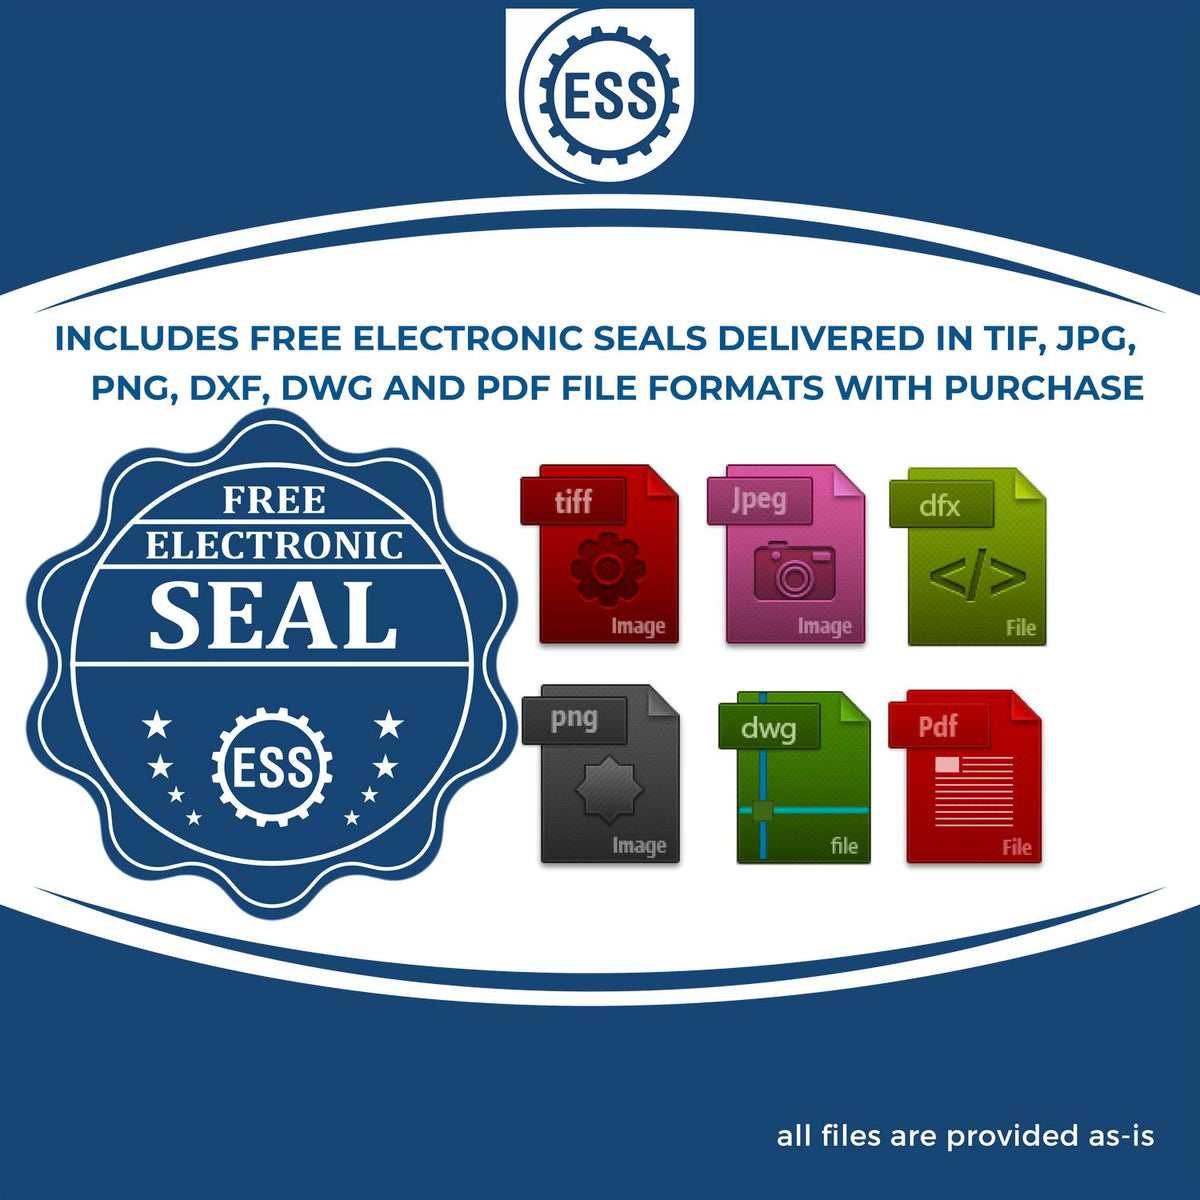 An infographic for the free electronic seal for the Michigan Professional Geologist Seal Stamp illustrating the different file type icons such as DXF, DWG, TIF, JPG and PNG.